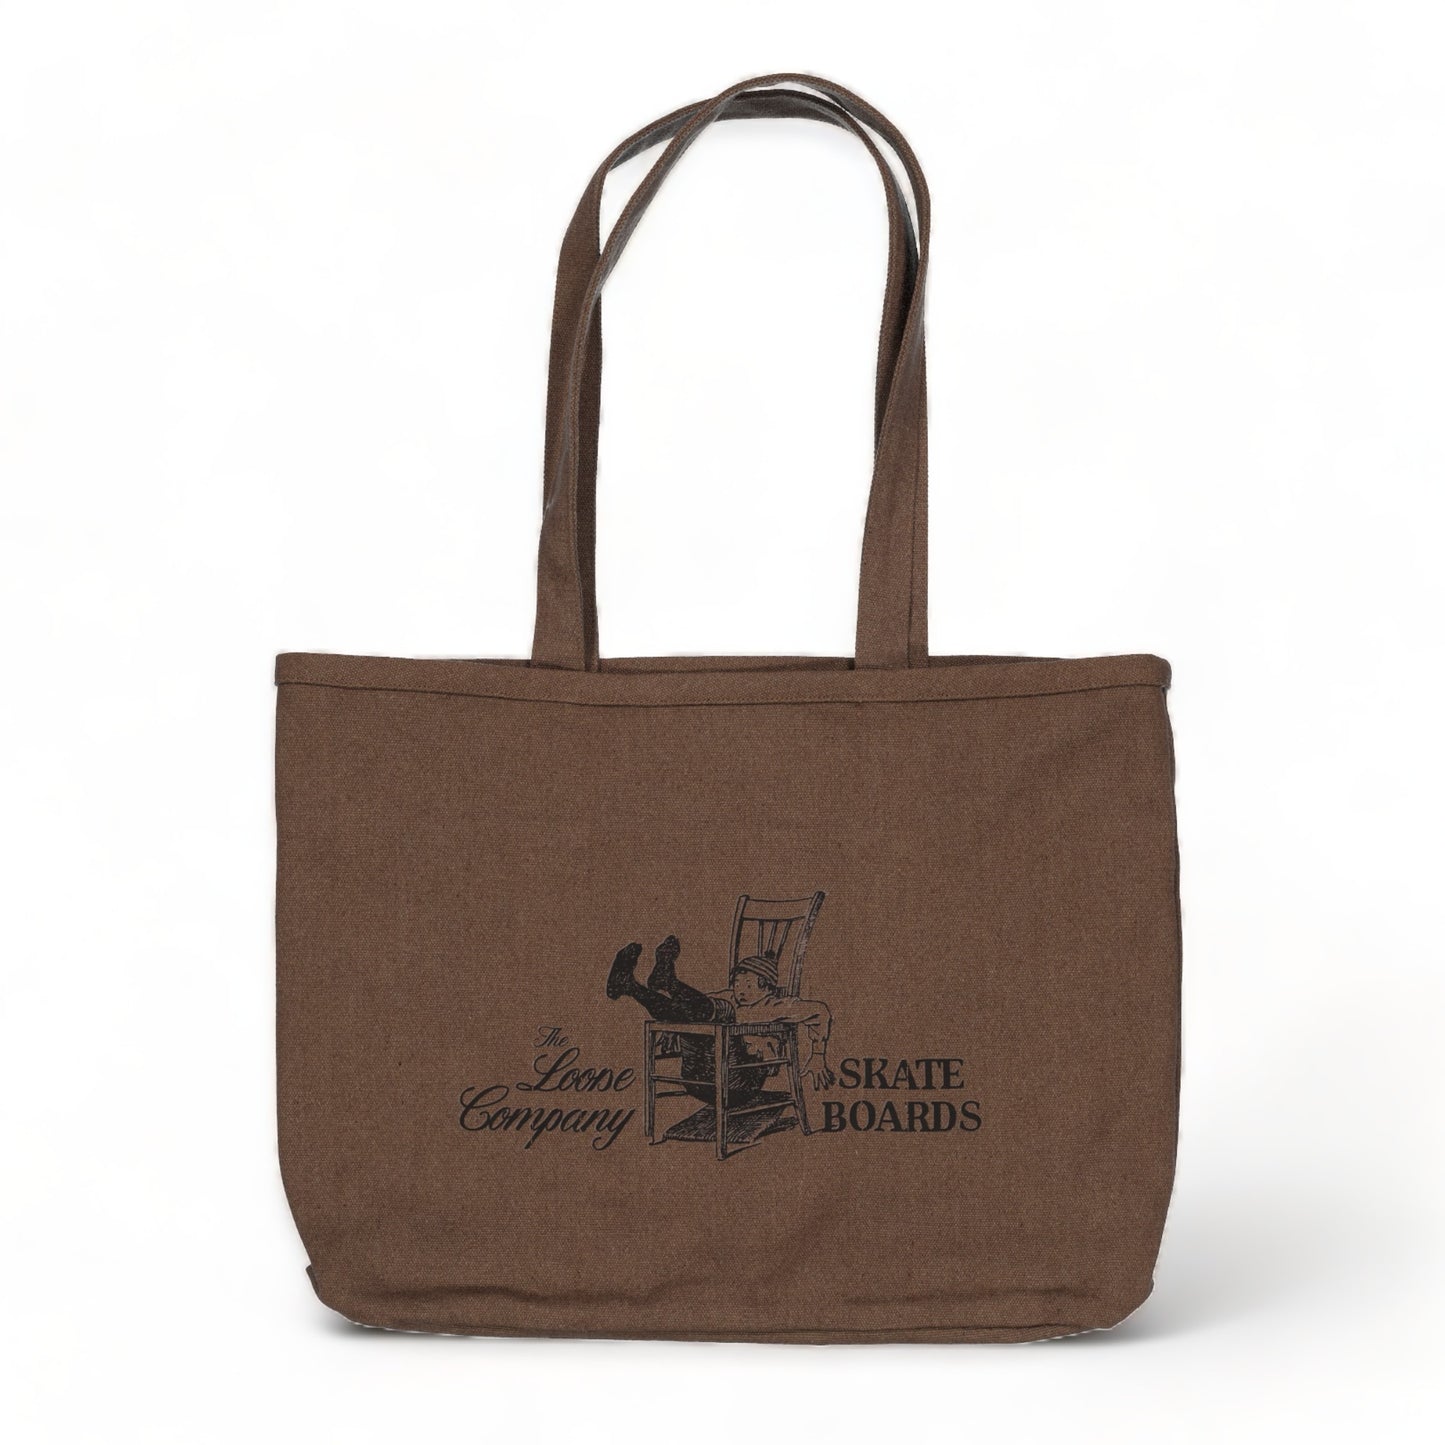 THE LOOSE COMPANY CHAIR TOTEBAG